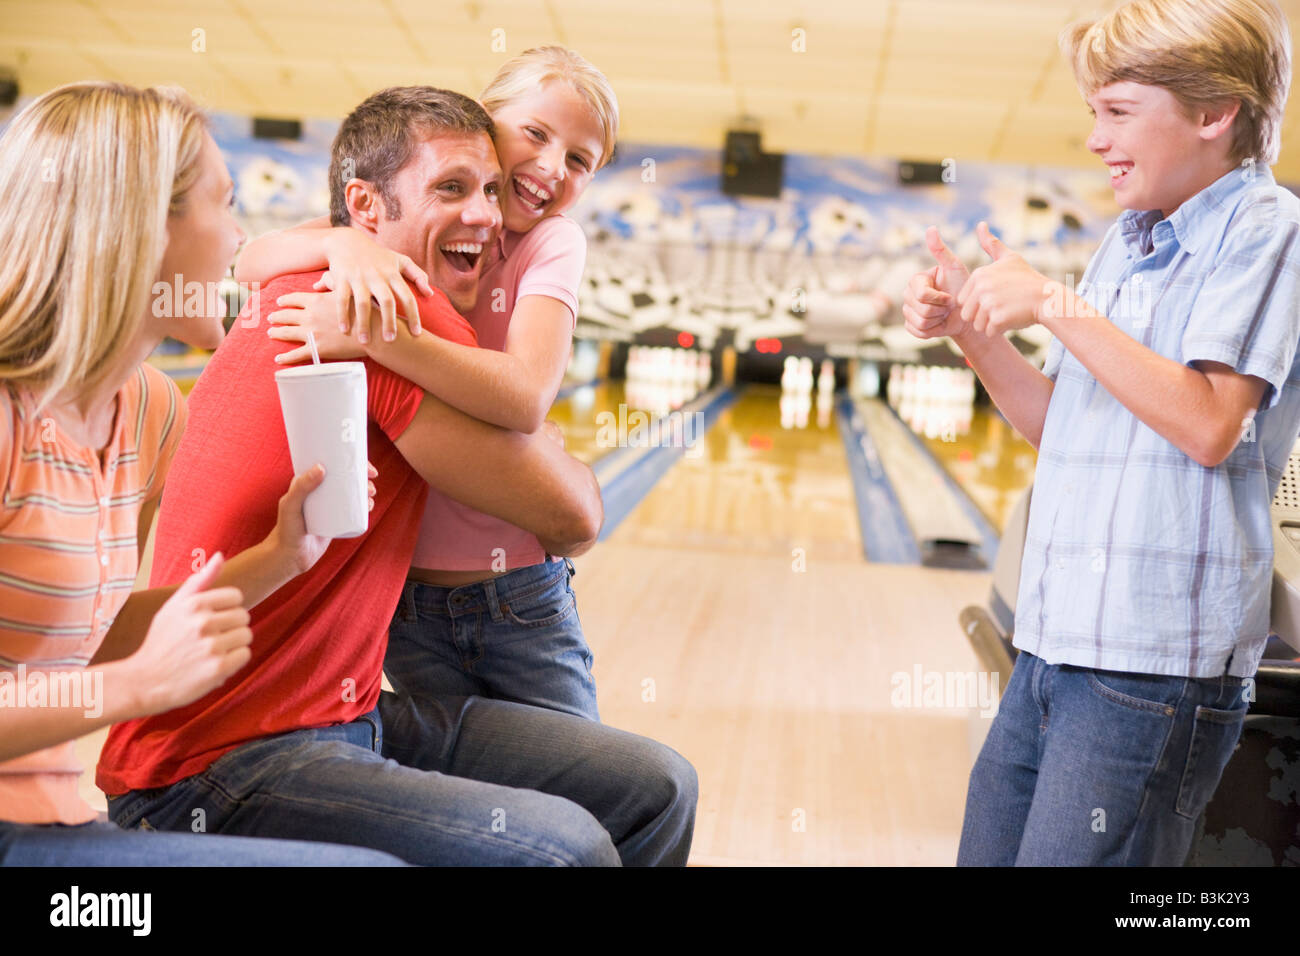 Family in bowling alley cheering and smiling Stock Photo